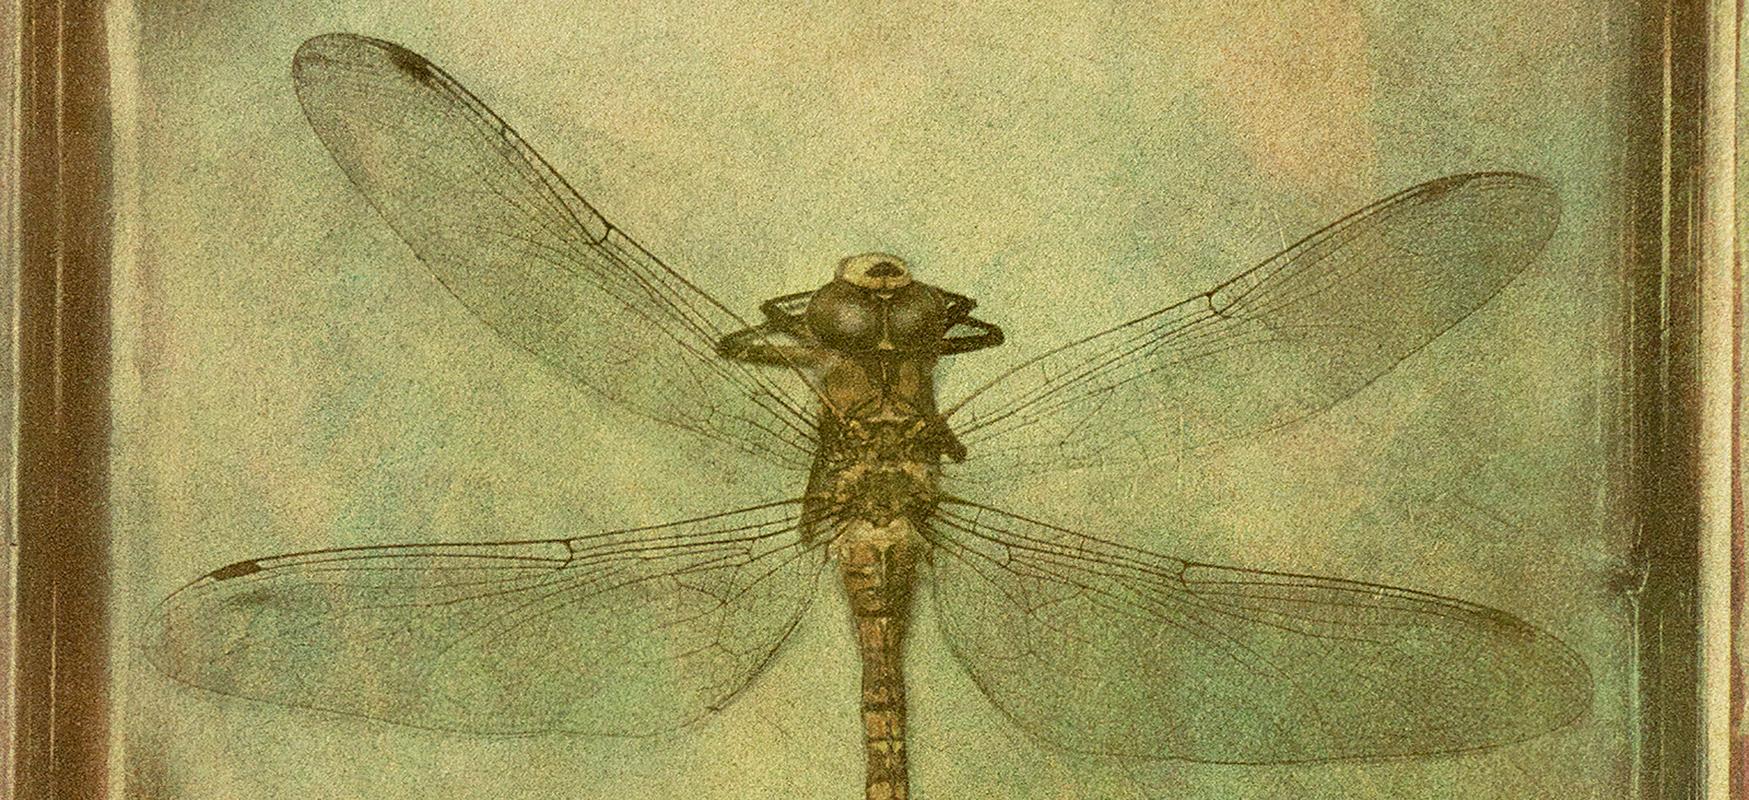 Dragonfly - Signed limited edition fine art print, Contemporary, Insect - Photograph by Ian Sanderson